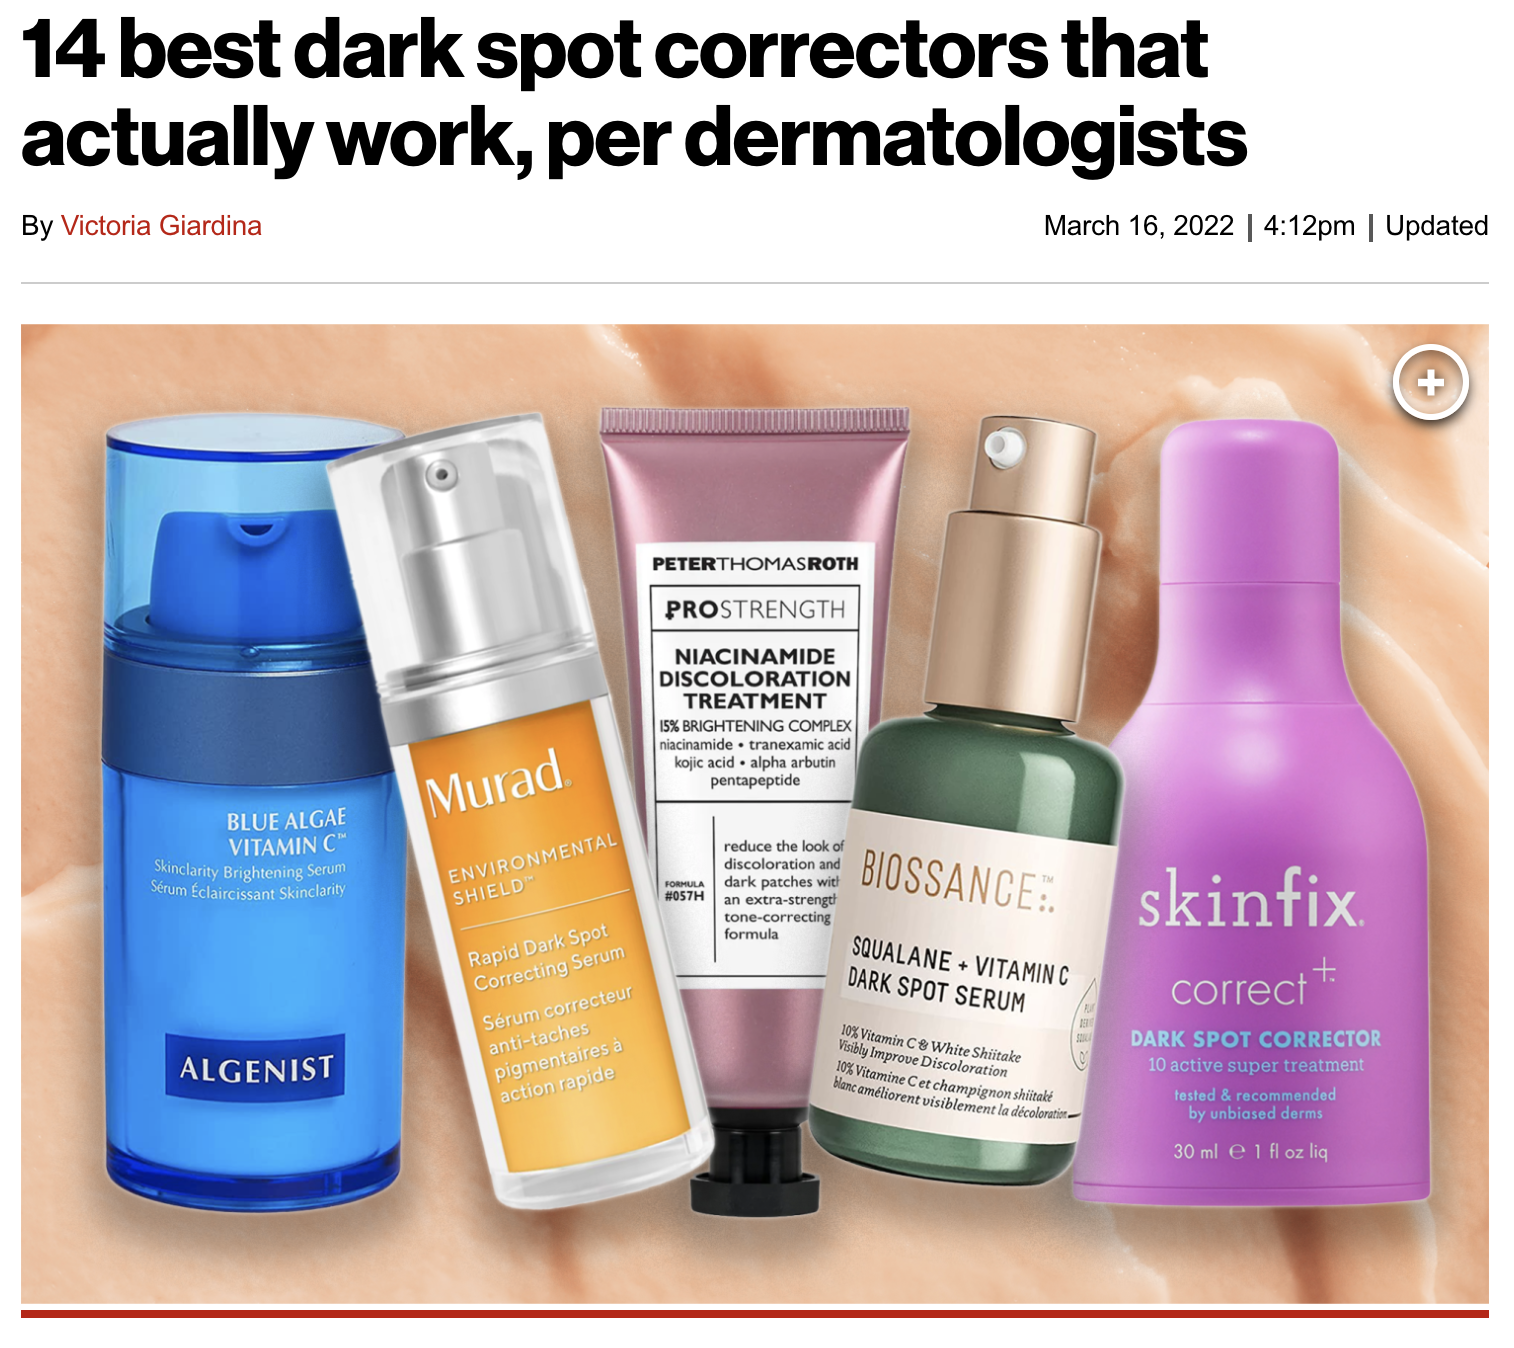 JUVA Skin & Laser Center Blog | Dr. Bruce Katz was featured in a NY Post article entitled 